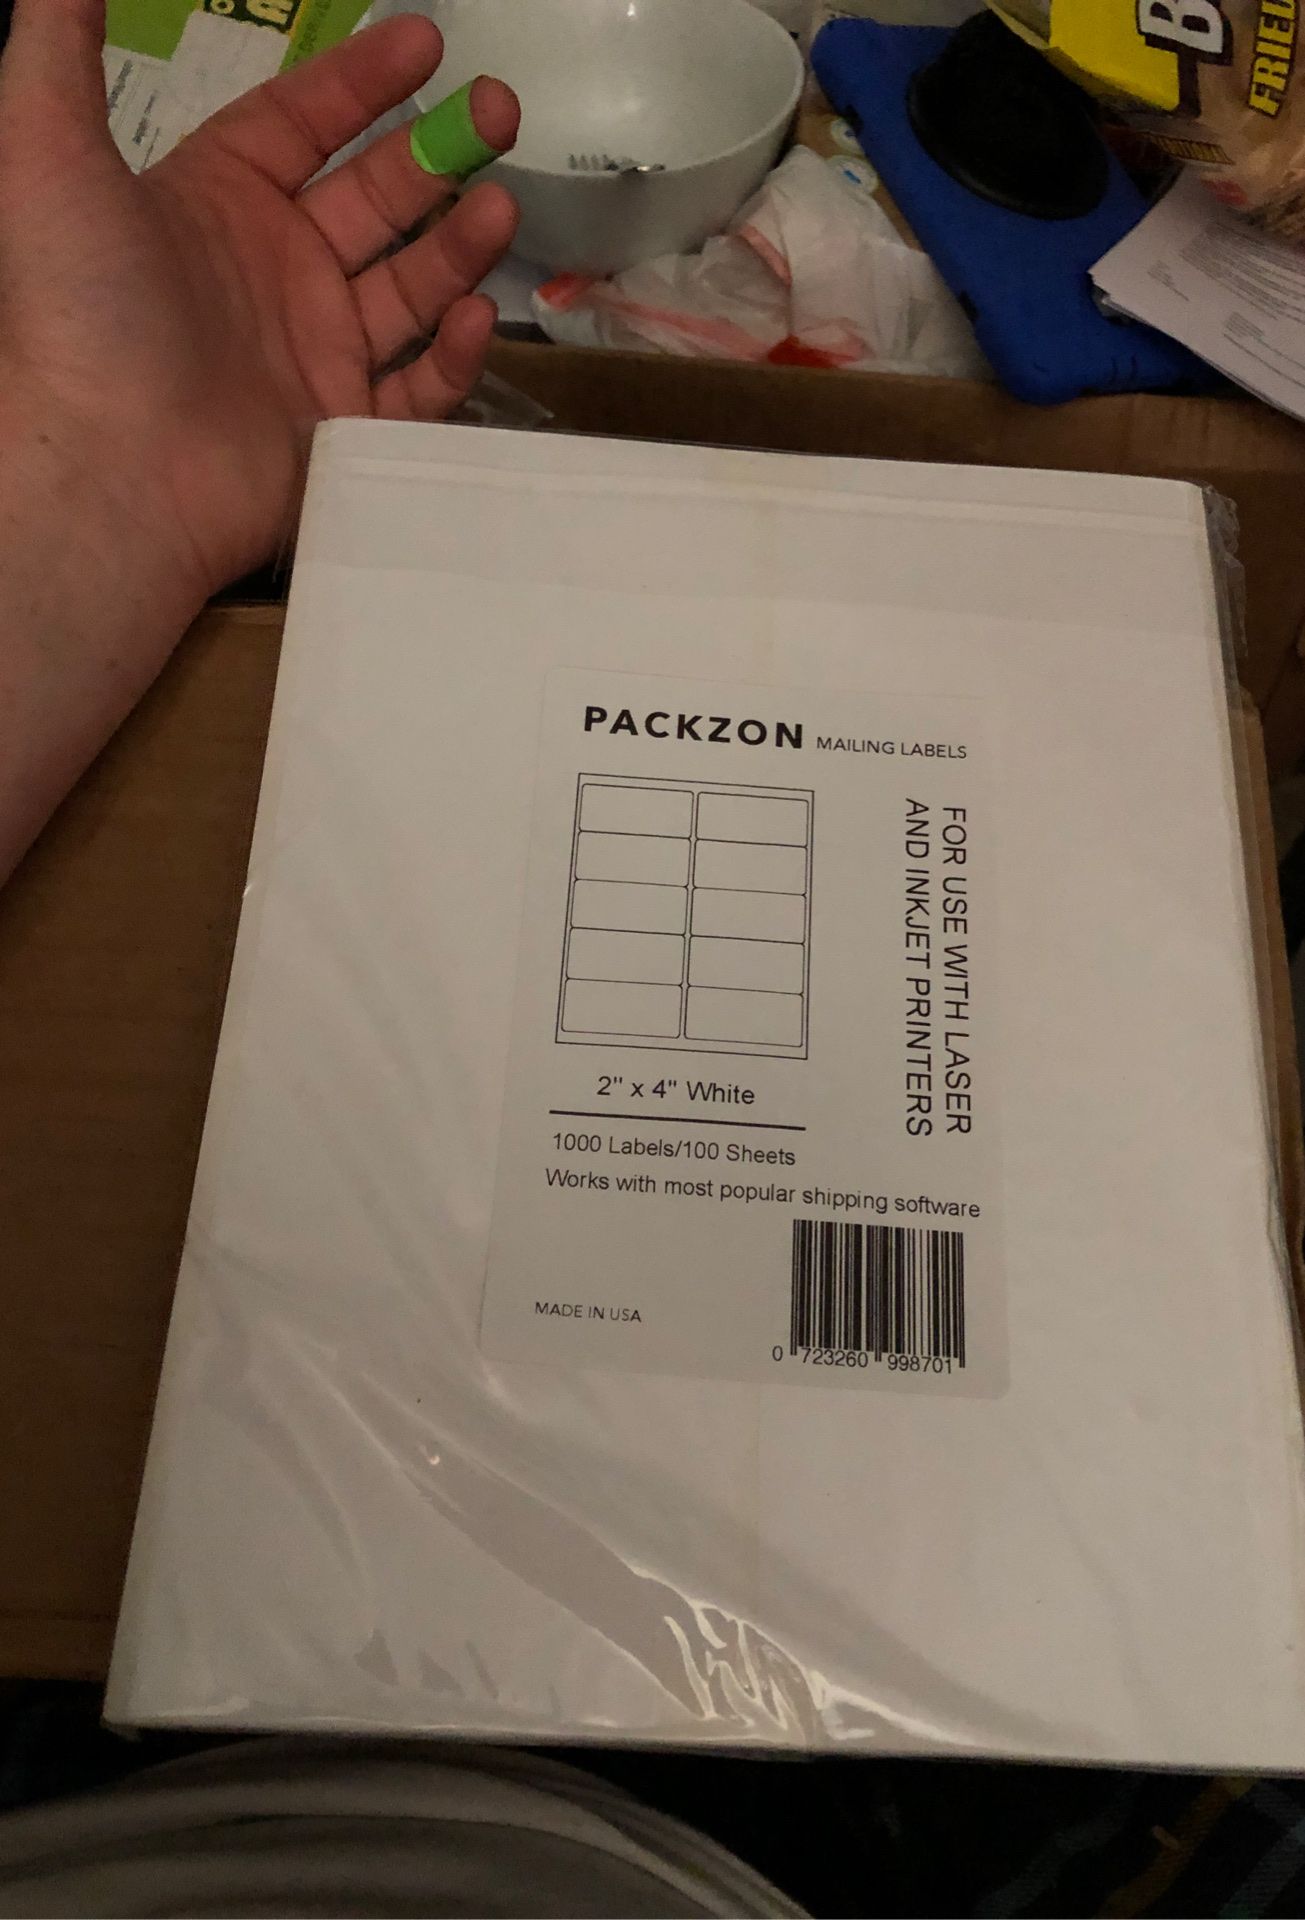 Packzon shipping labels